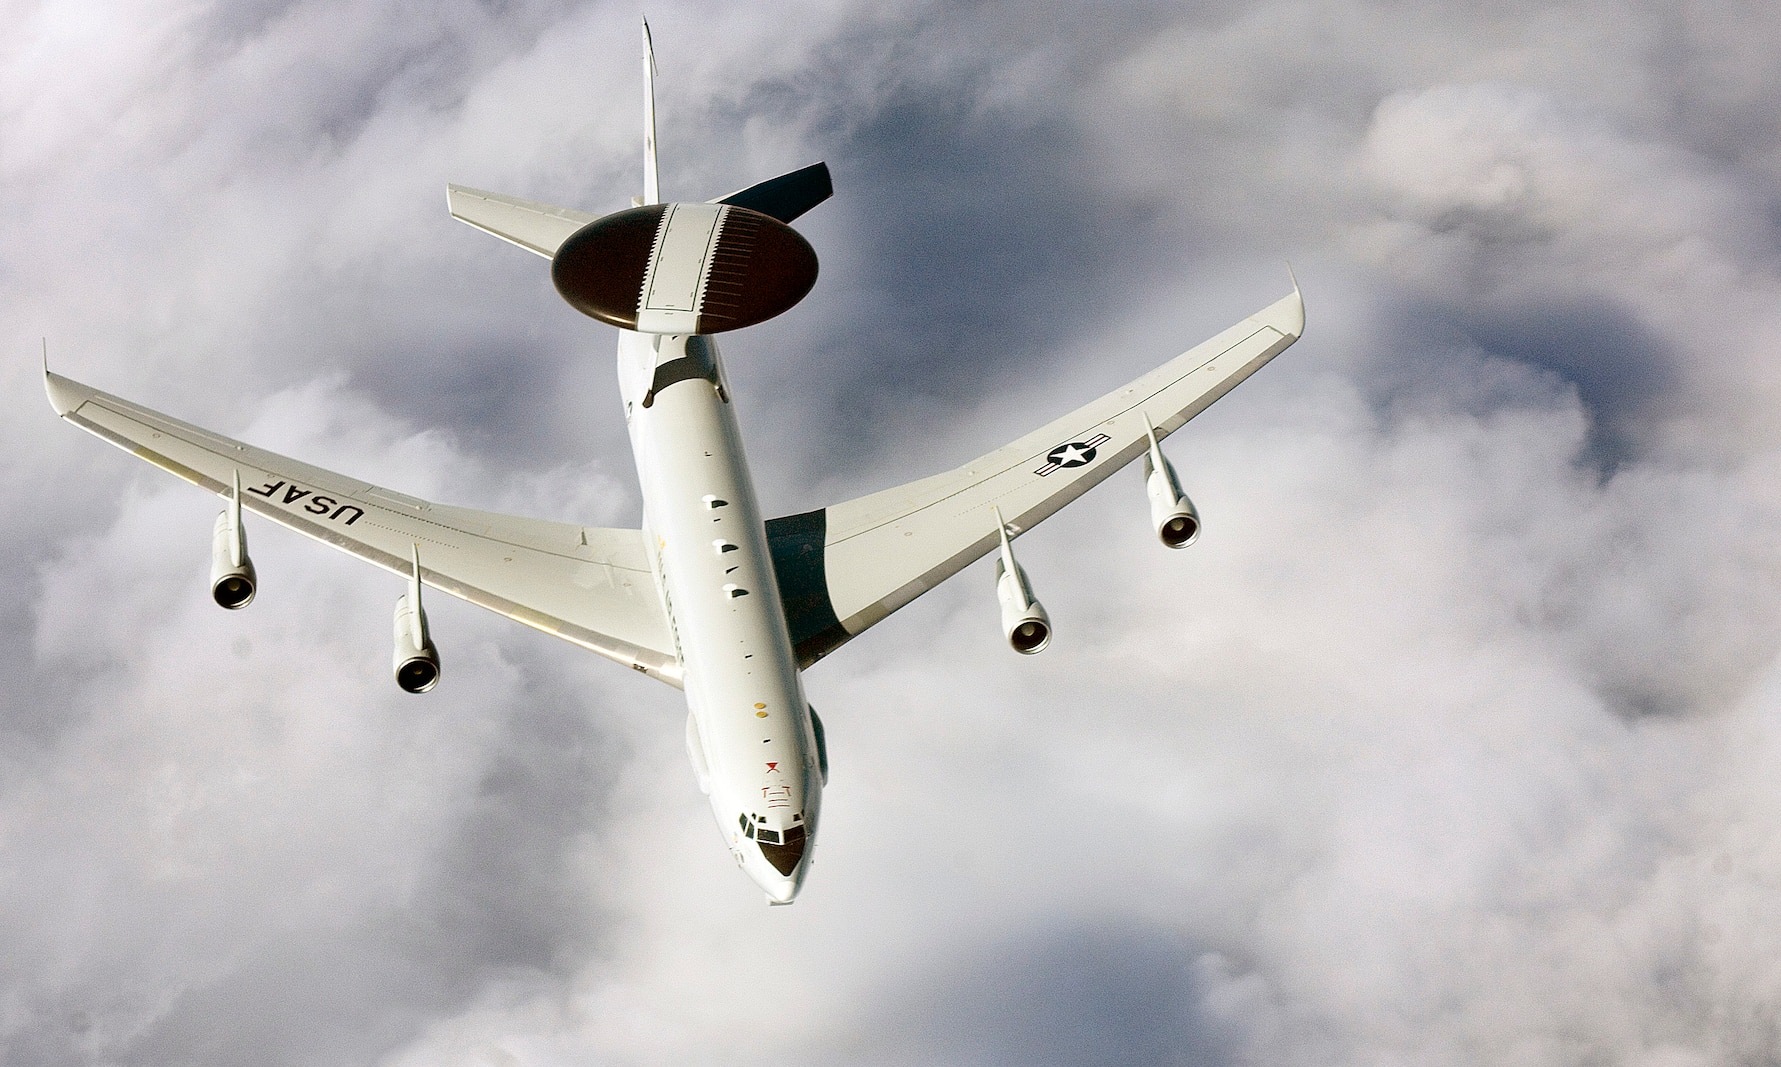 An E-3 Sentry airborne warning and control system aircraft flies a surveillance mission over the eastern Pacific Ocean Aug. 1 to find drug runners. The Sentry is deployed to Forward Operating Location Manta, Ecuador, from Tinker Air Force Base, Okla.  (U.S. Air Force photo/Tech. Sgt. Cecilio Ricardo)